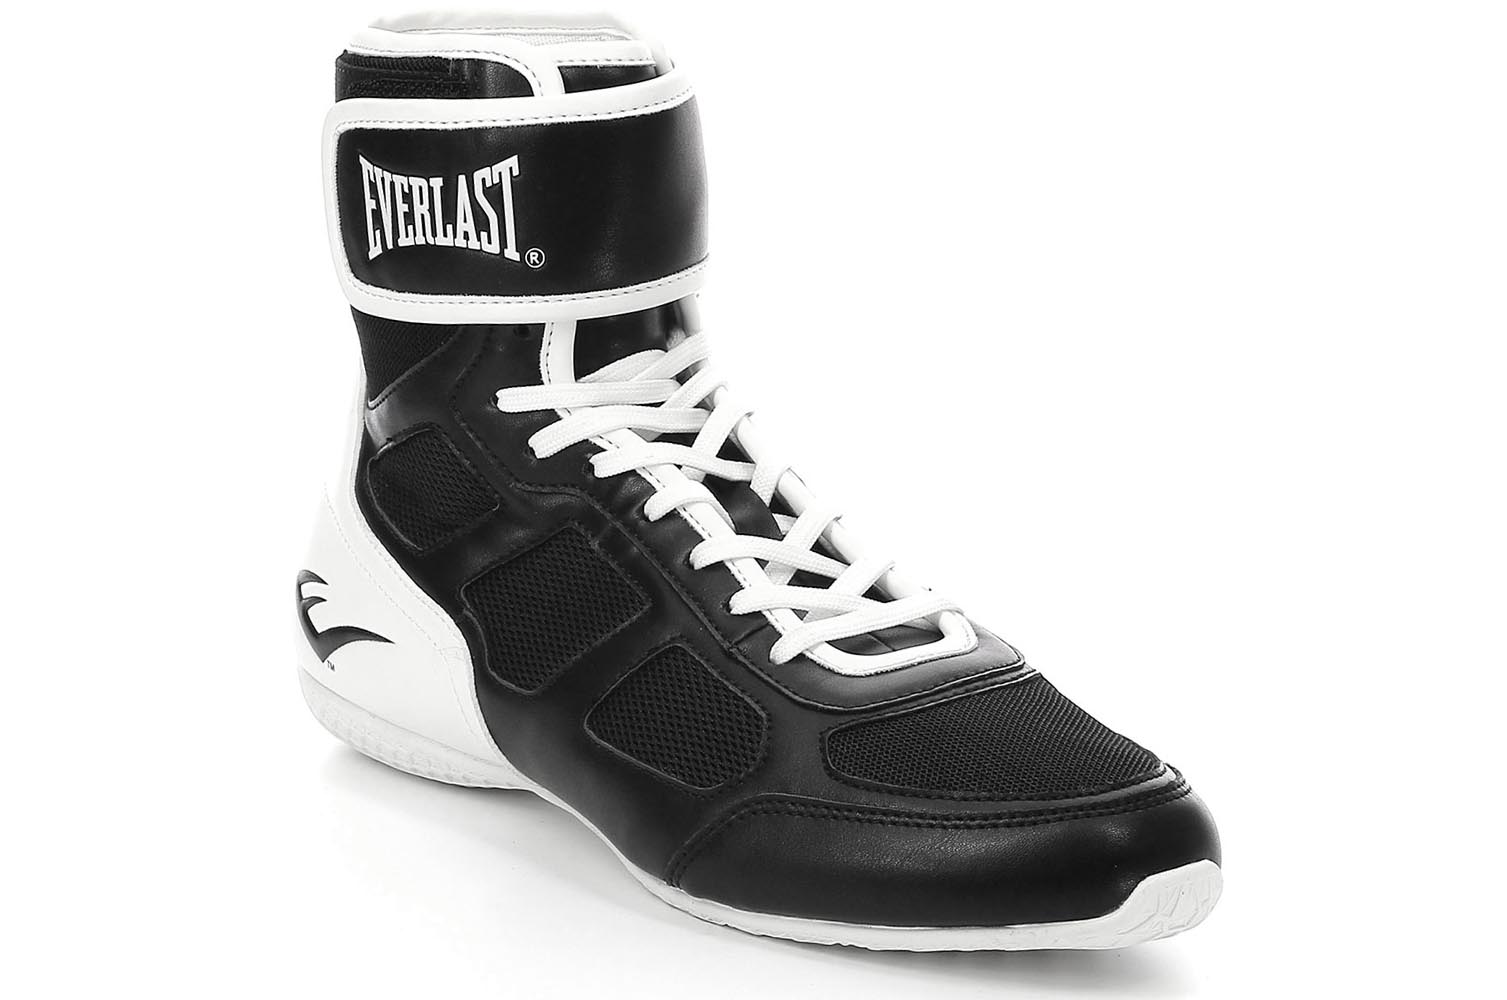 CLEARANCE SALES EVERLAST BOXING SHOES BOOTS LOW TOP Eur 37-46 Red